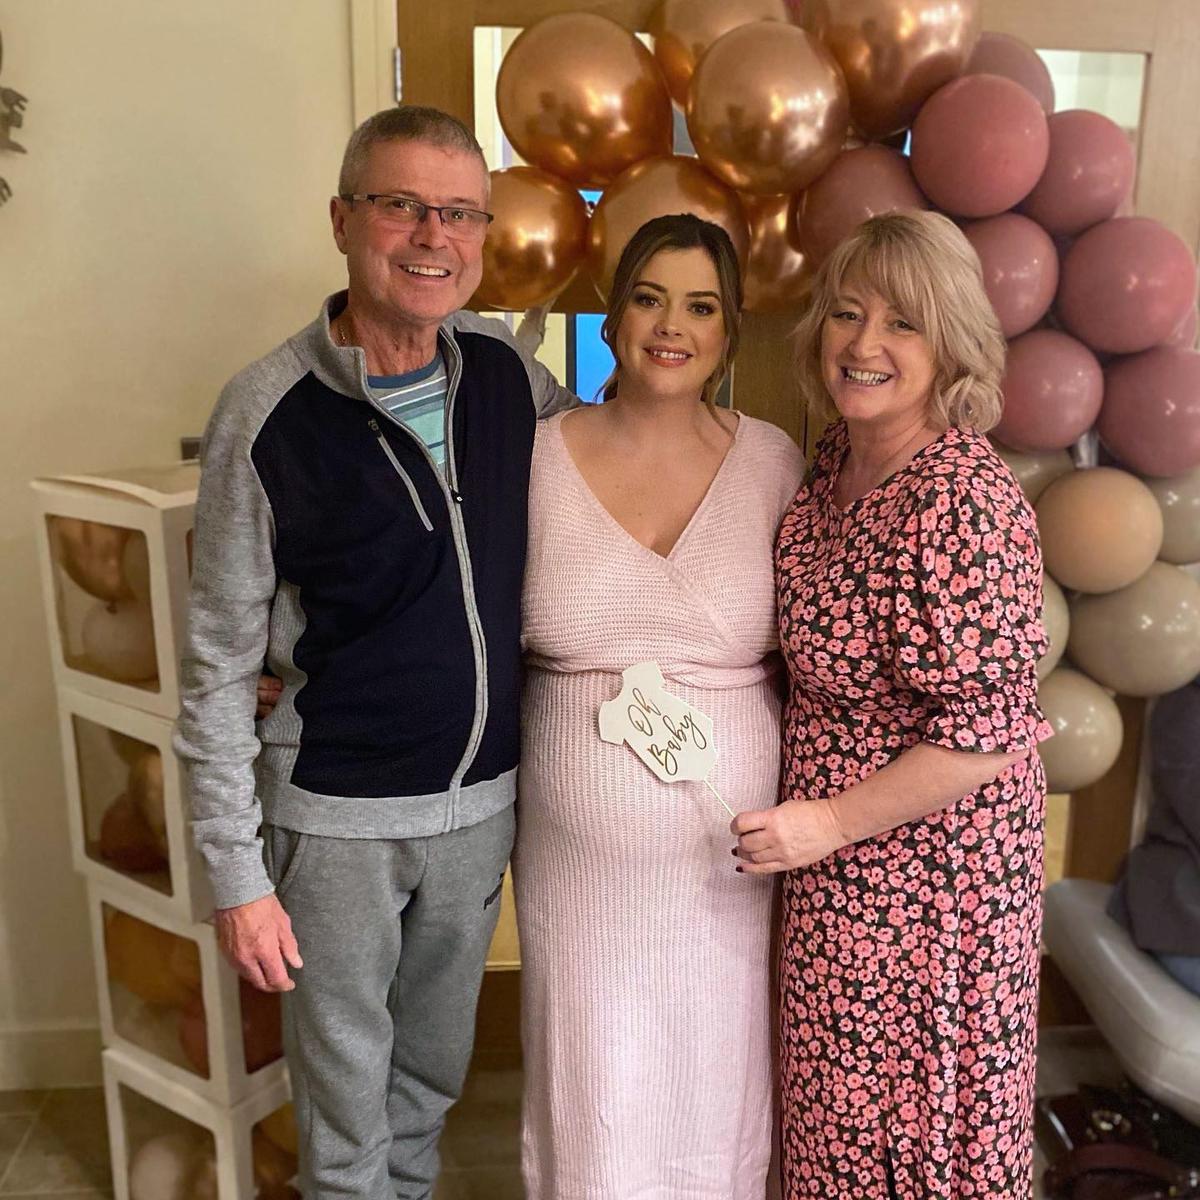 Lucy with her parents, pregnant with baby Amelia (Courtesy of <a href="https://www.instagram.com/lucygemmaogrady/">Lucy Watts</a>)